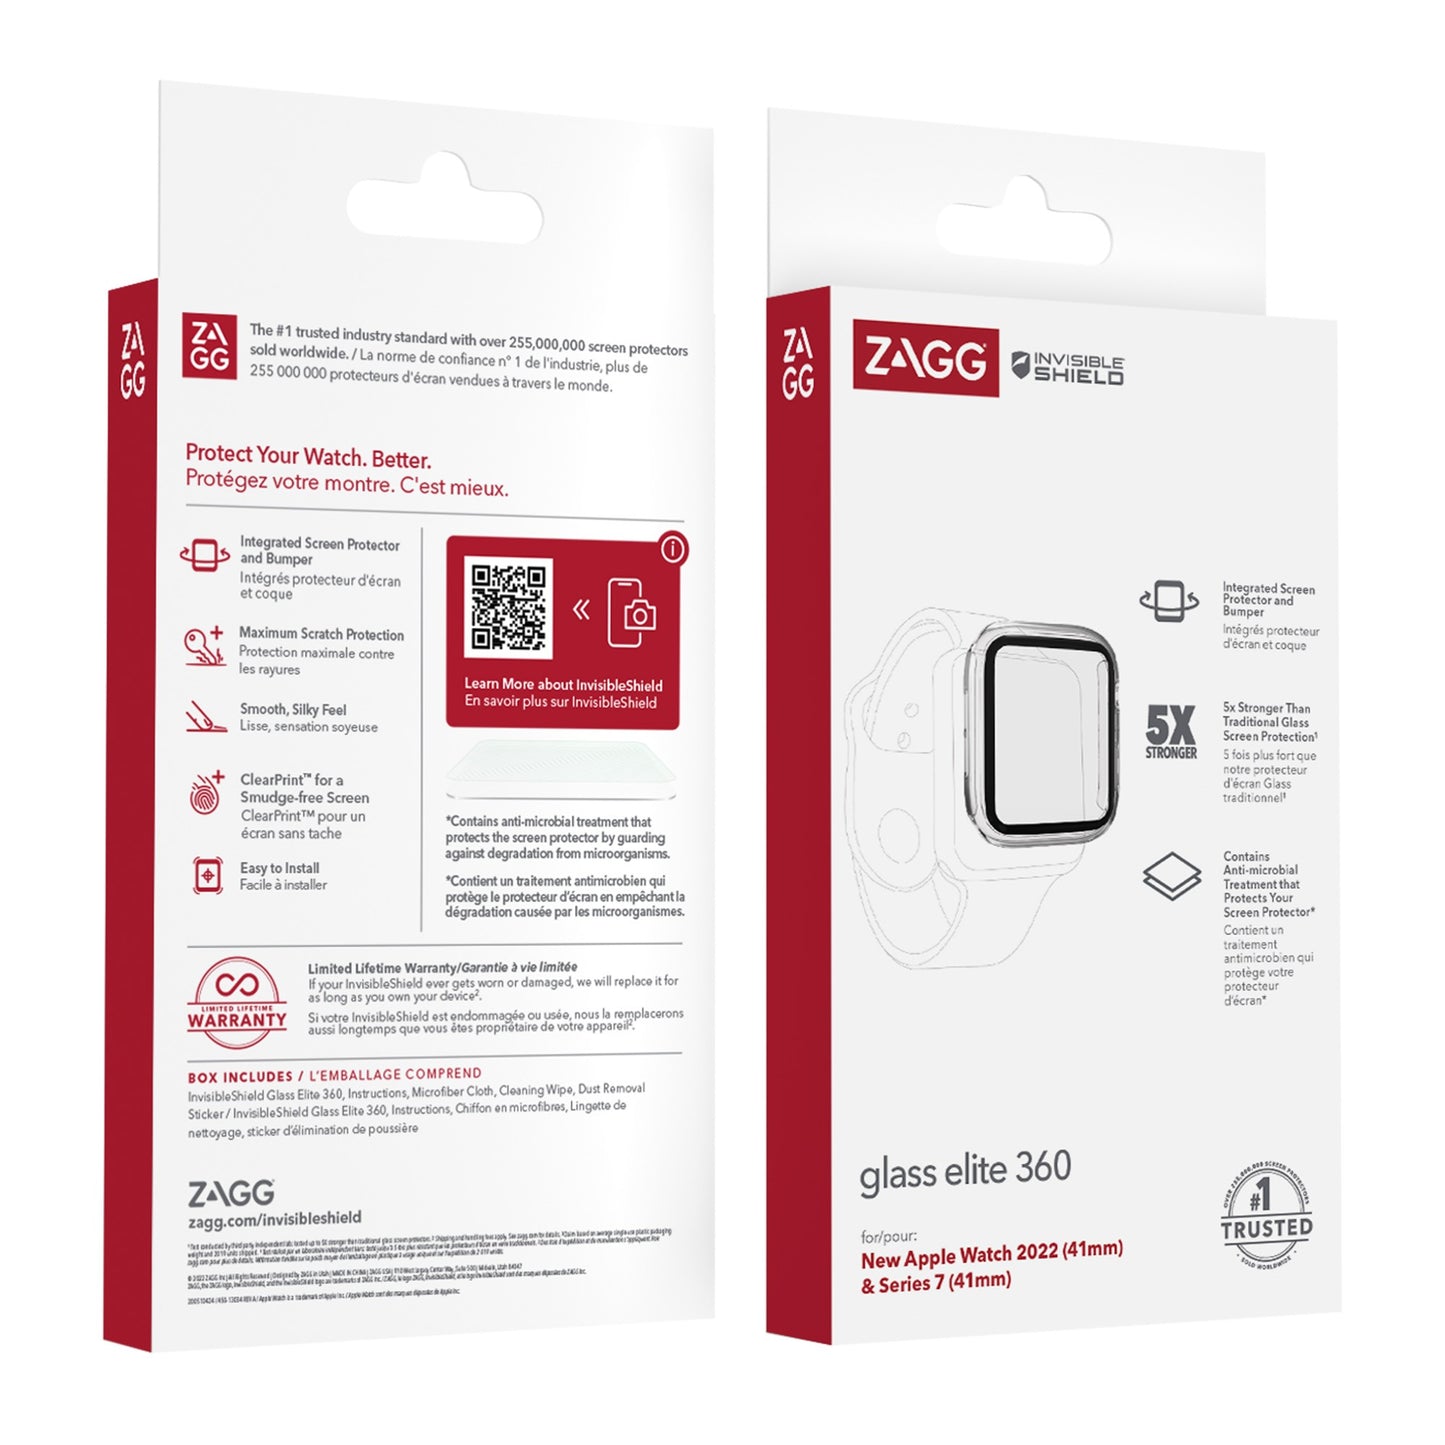 Apple Watch (41mm) ZAGG InvisibleShield Glass Elite 360 Screen Protector - 15-10534